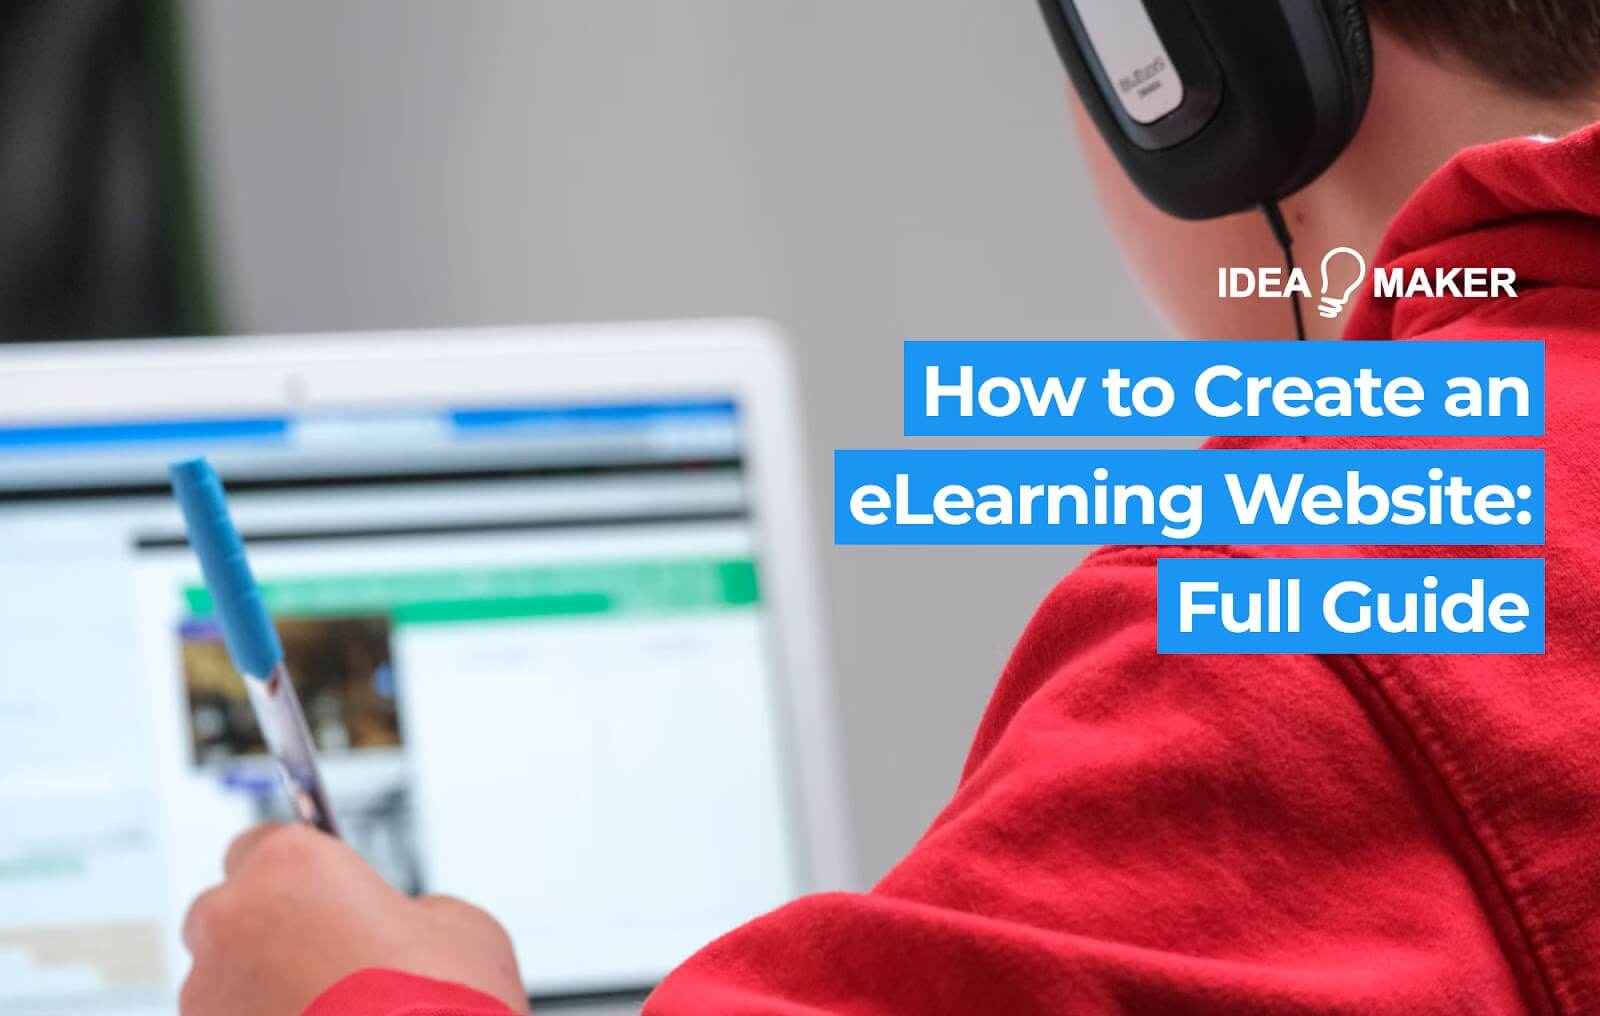 How to Create an eLearning Website: Full Guide